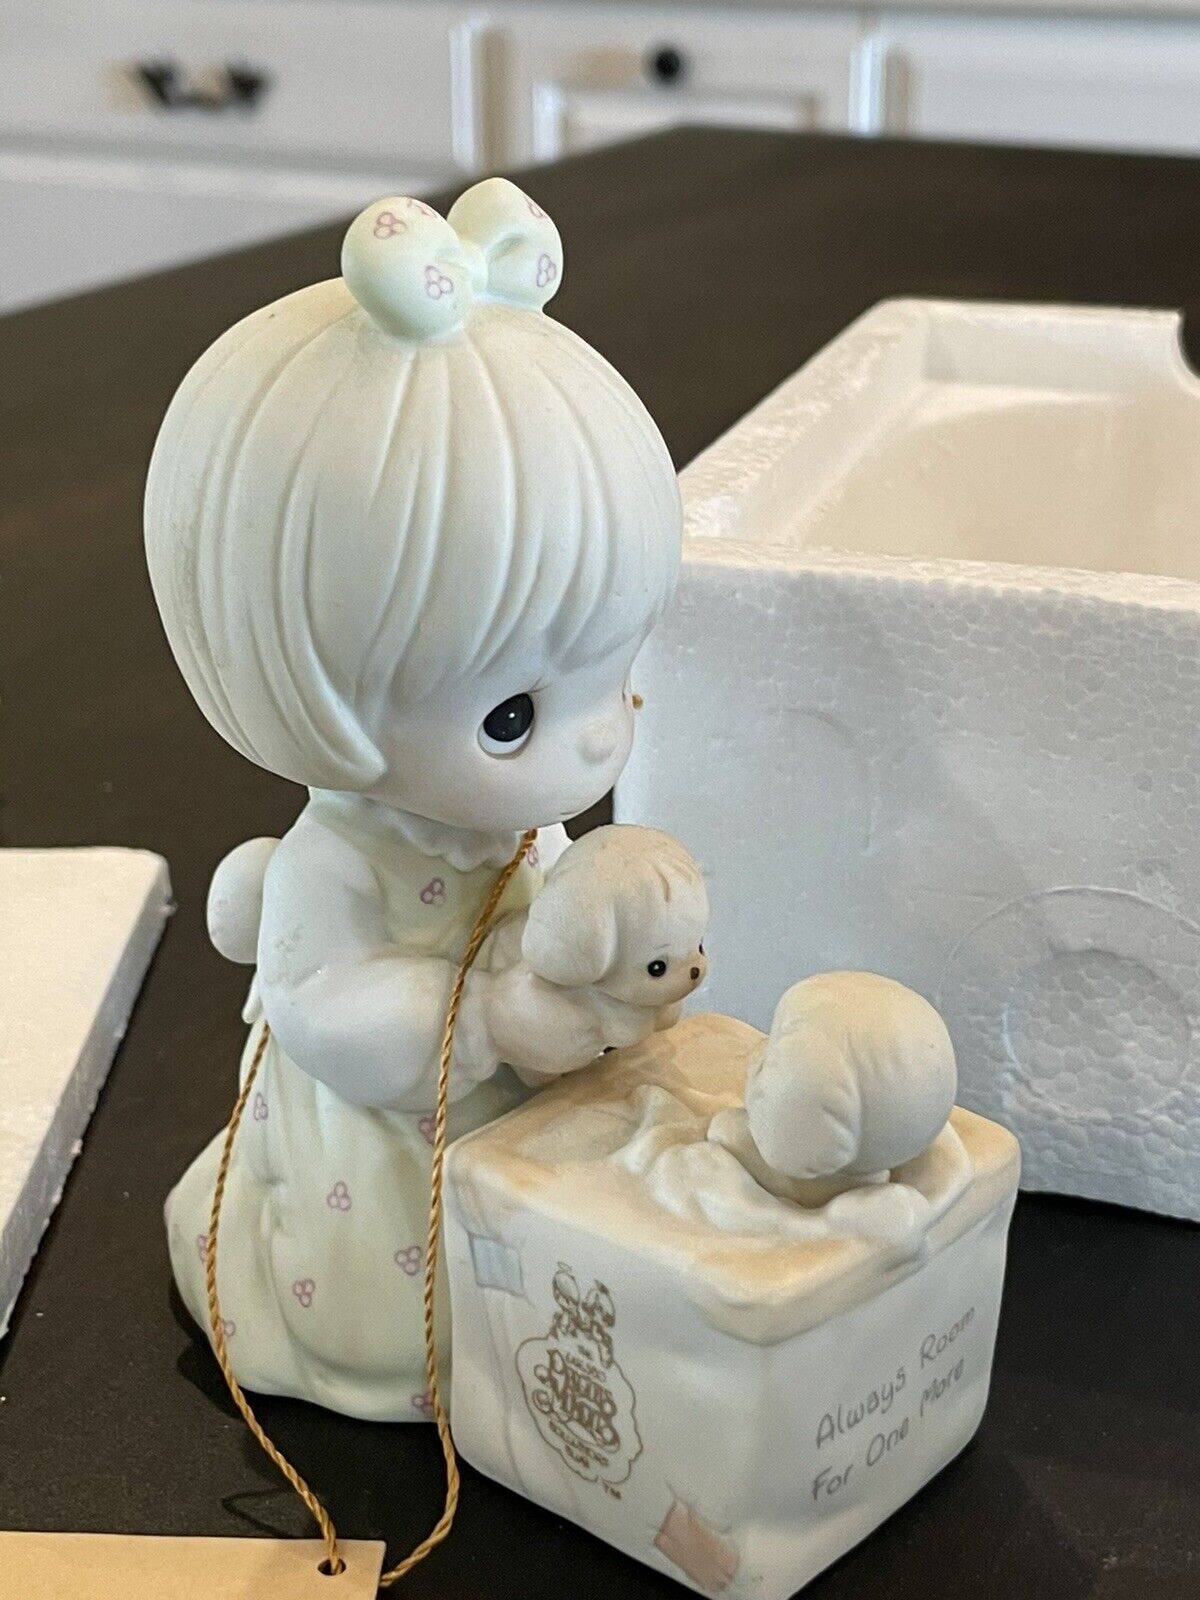 Precious Moments - There’s Always Room for one More - In Box - C0009 106